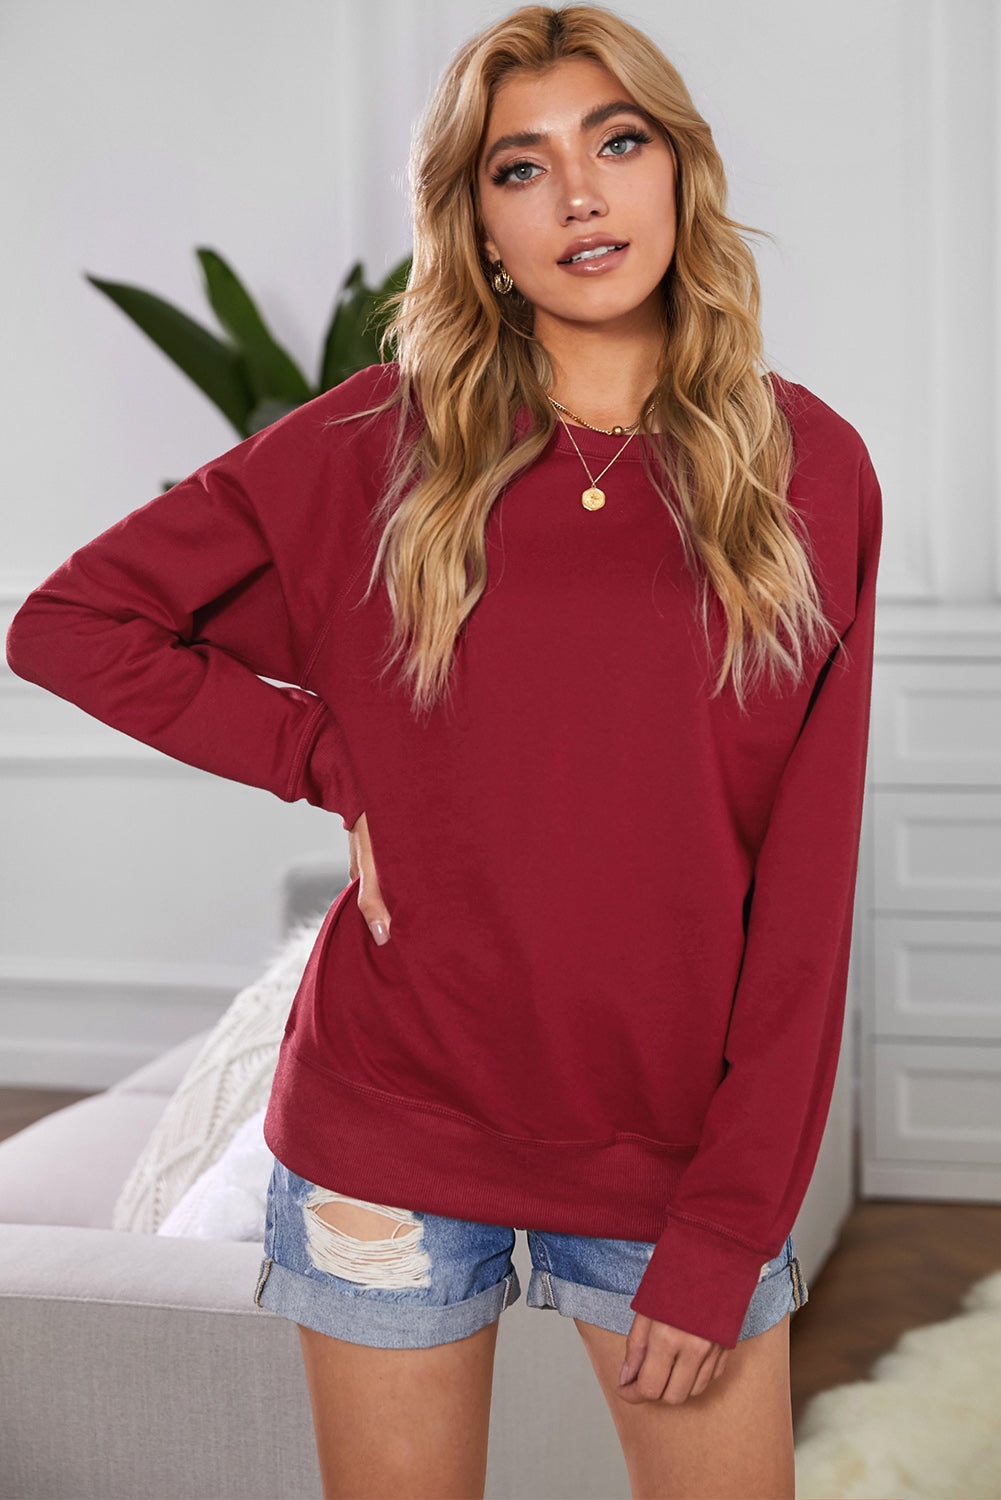 Blank Apparel - French Terry Cotton Blend Pullover Sweatshirt